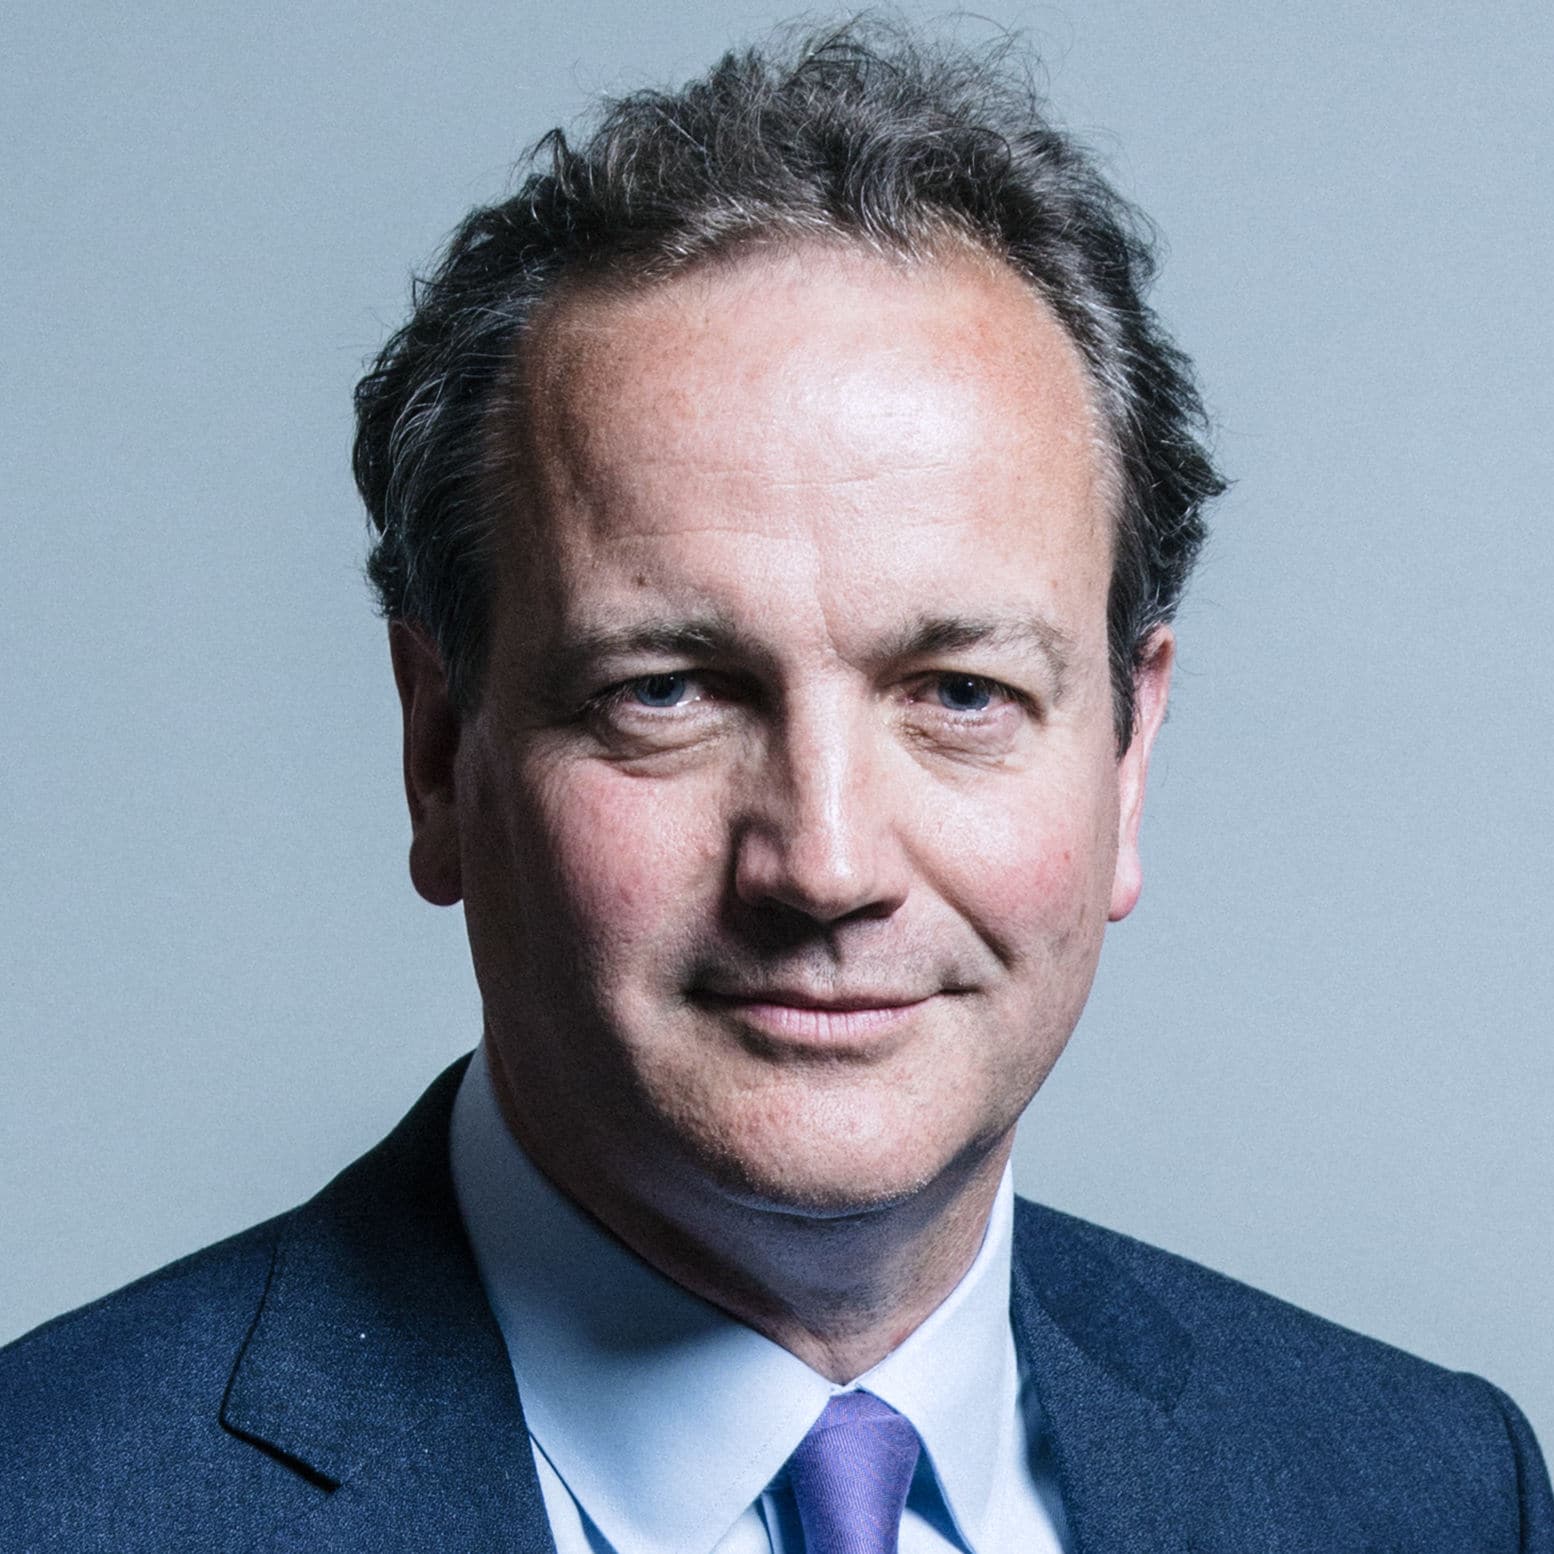 Nick Hurd to become chair of Access